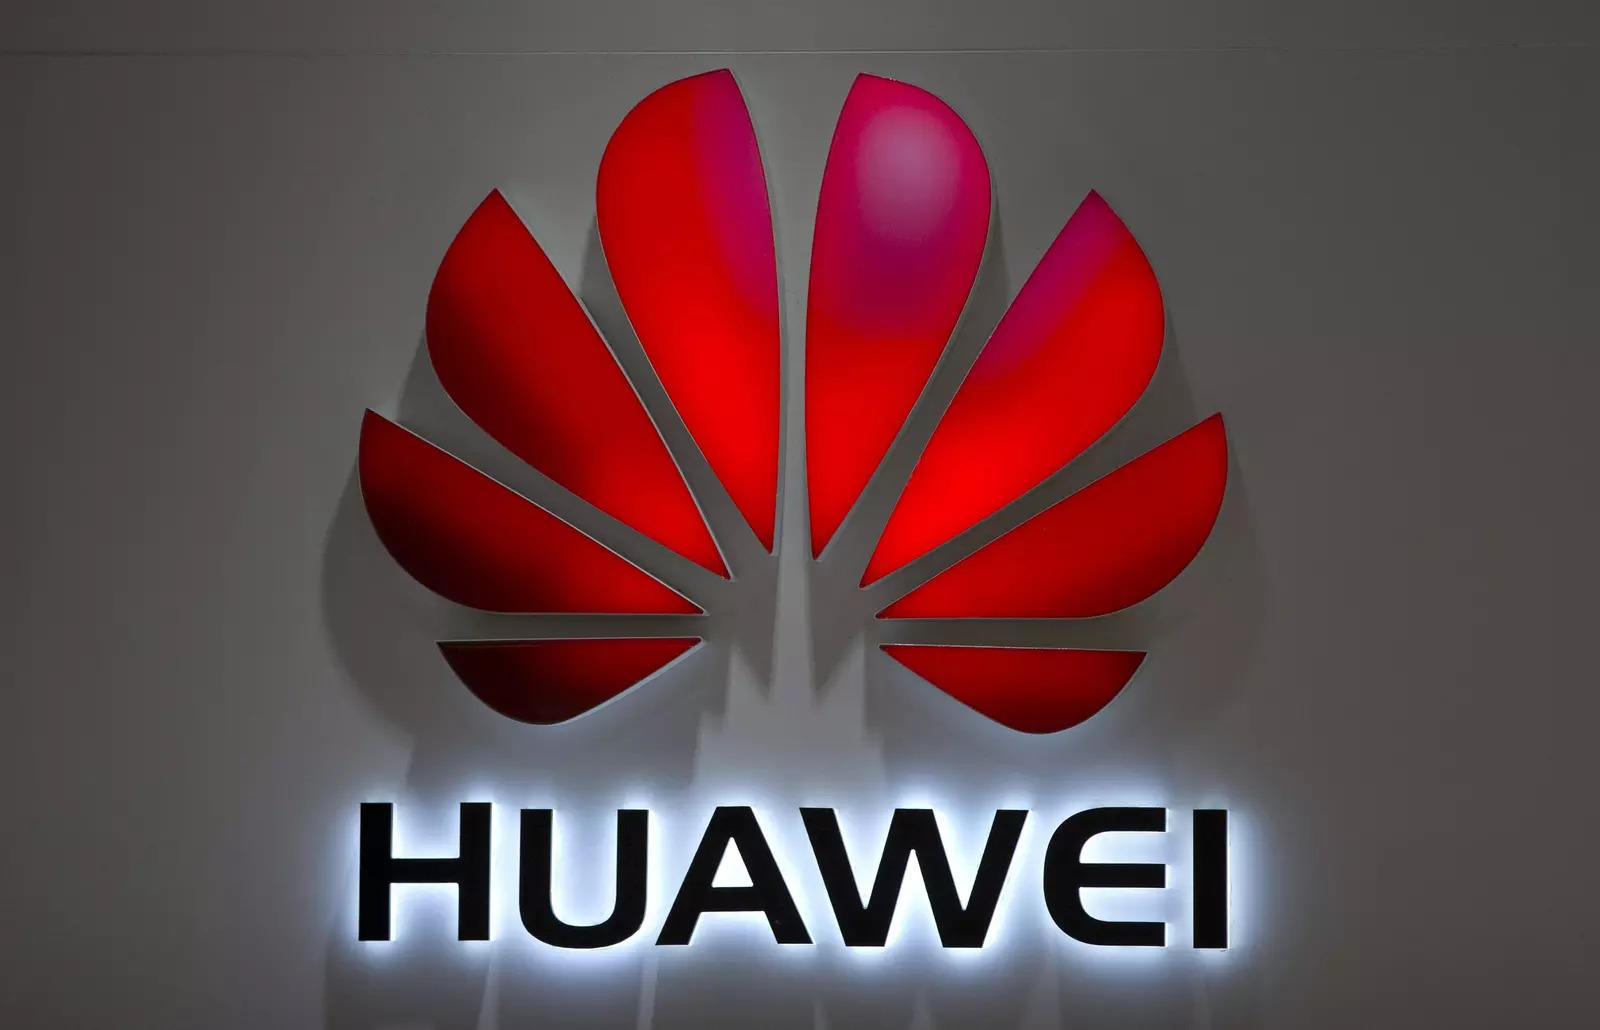  That is striking considering that Huawei has been at the center of a geopolitical battle over global technology supremacy that's left parts of its business crippled by Western sanctions.